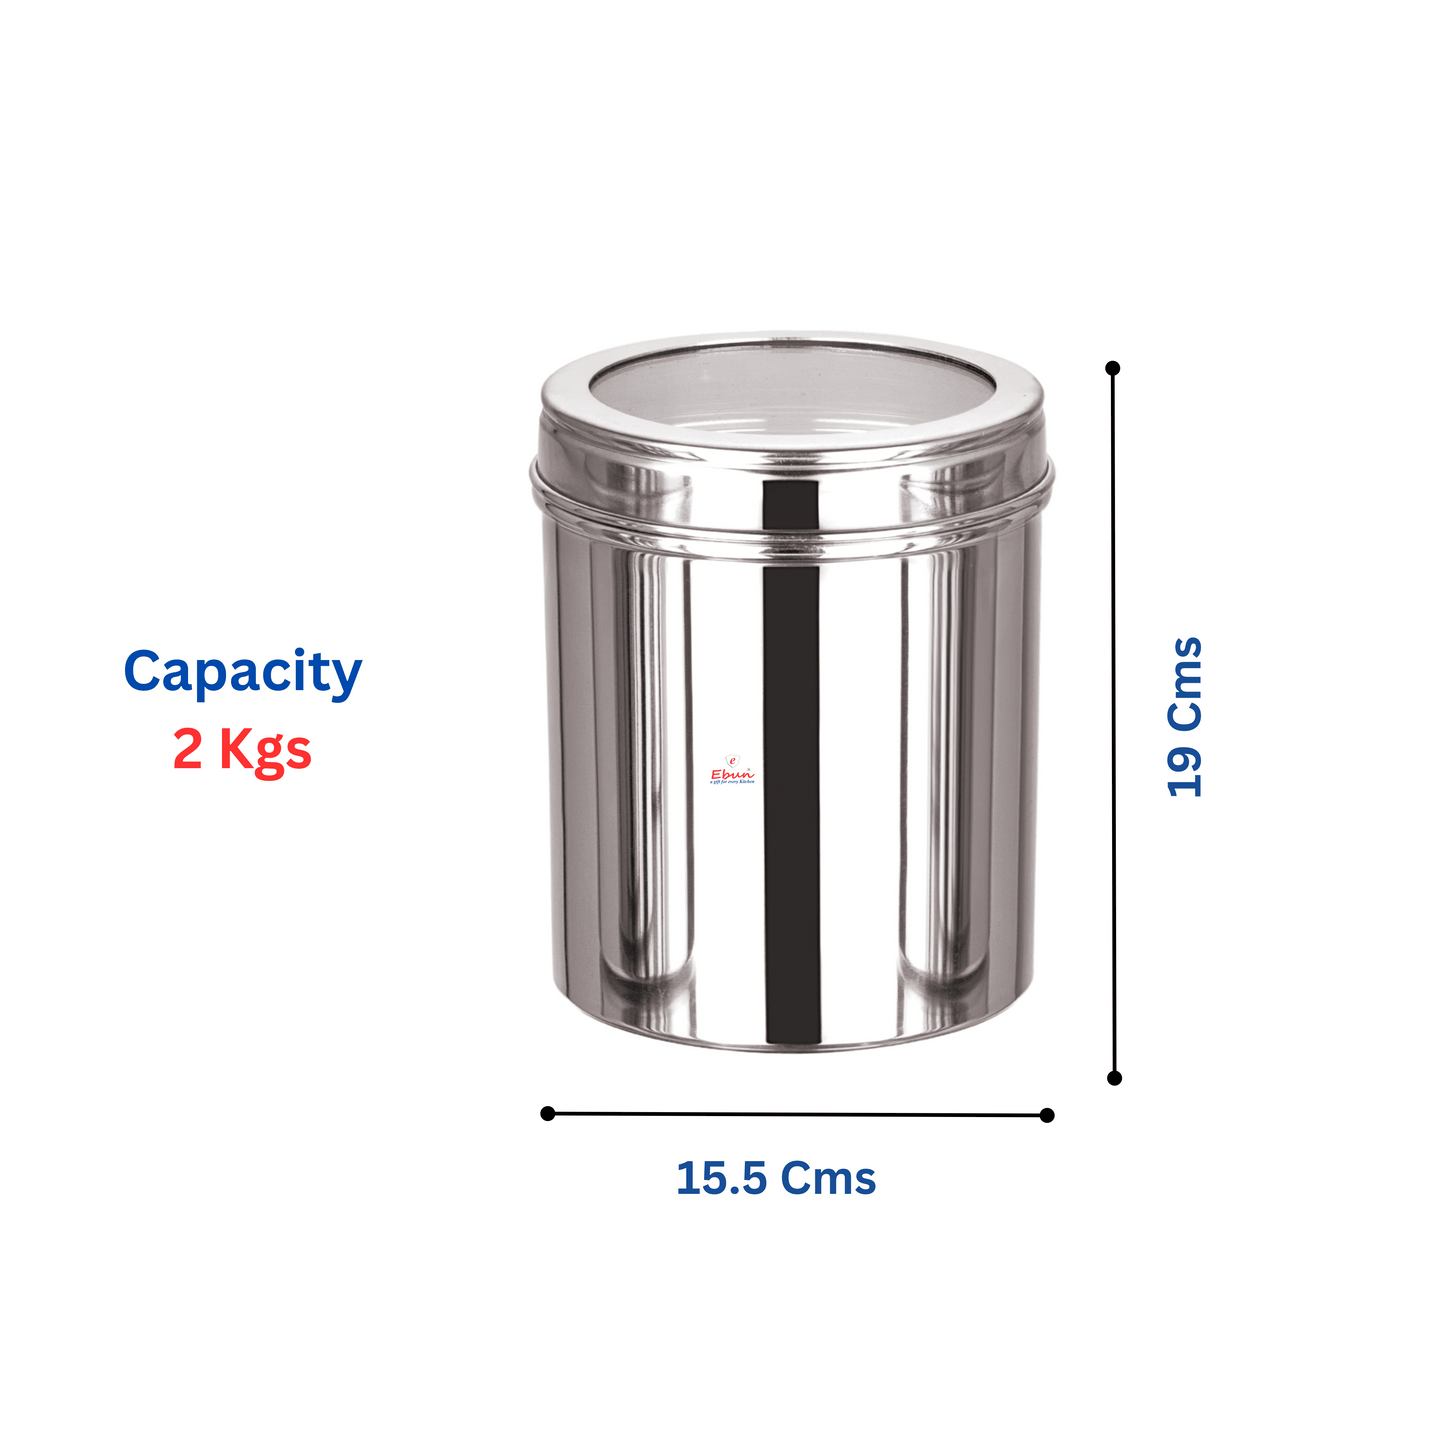 steel small containers with lid | air tight steel container | steel container 5kg | 5kg steel container for kitchen storage | food storage containers steel | steel air tight containers for storage | steel container for kitchen | container steel | air tight steel containers for storage